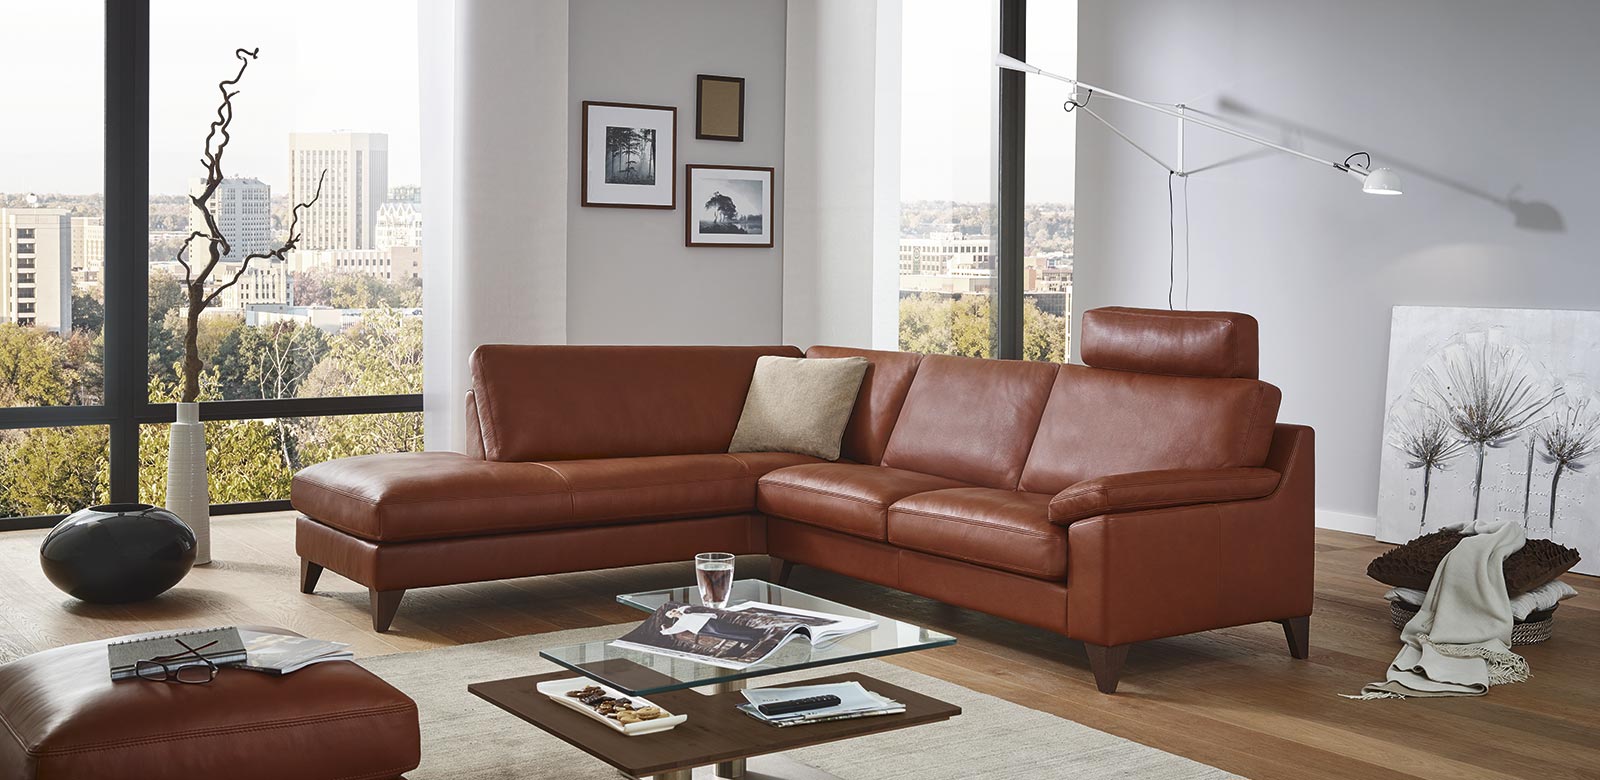 CL650 over corner with long chair in red-brown leather in city flat